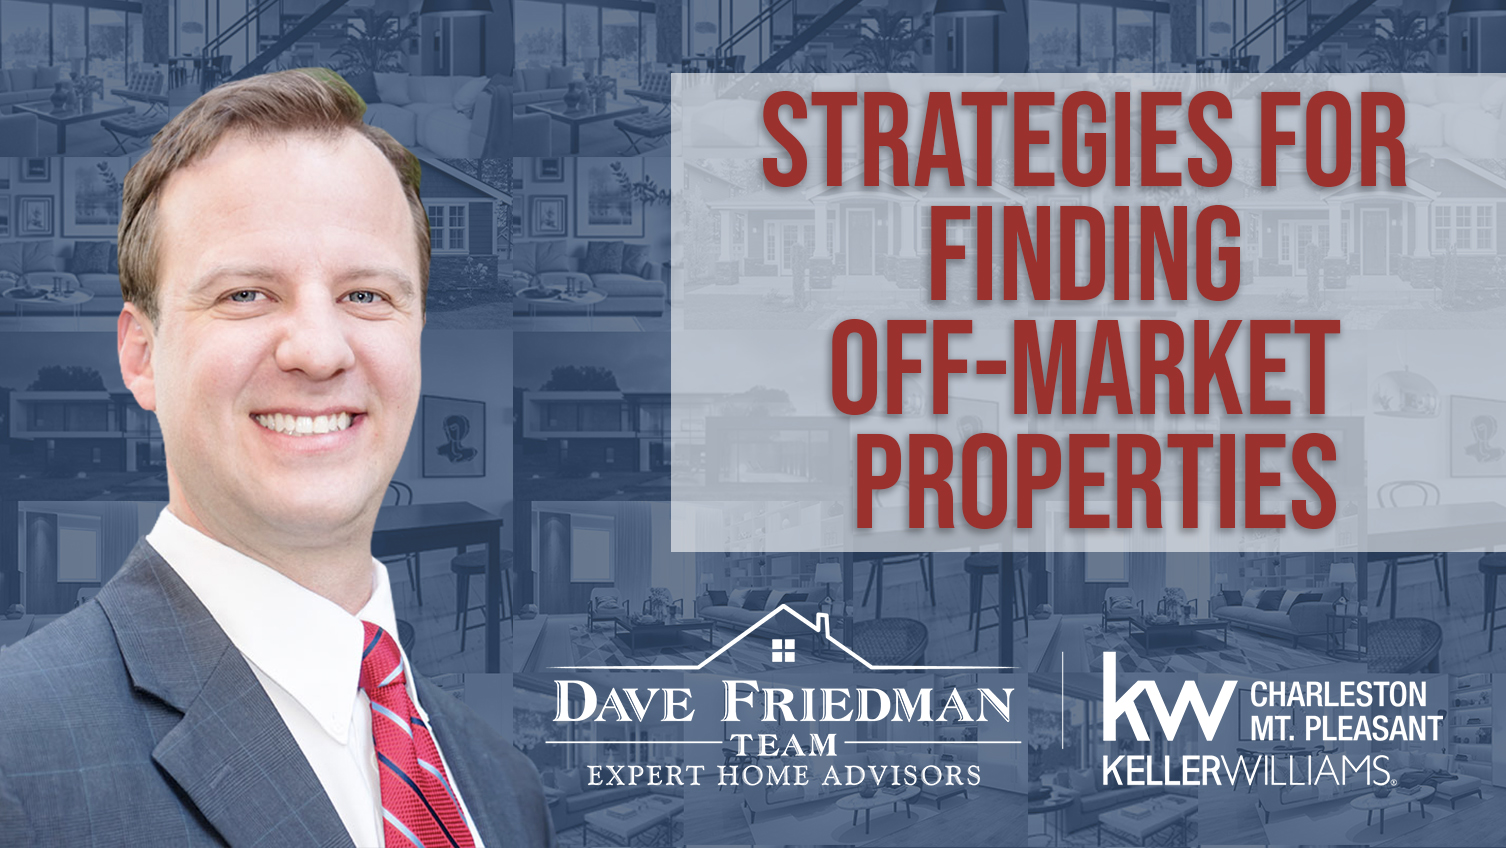 Q: How Can You Find Off-Market Properties?